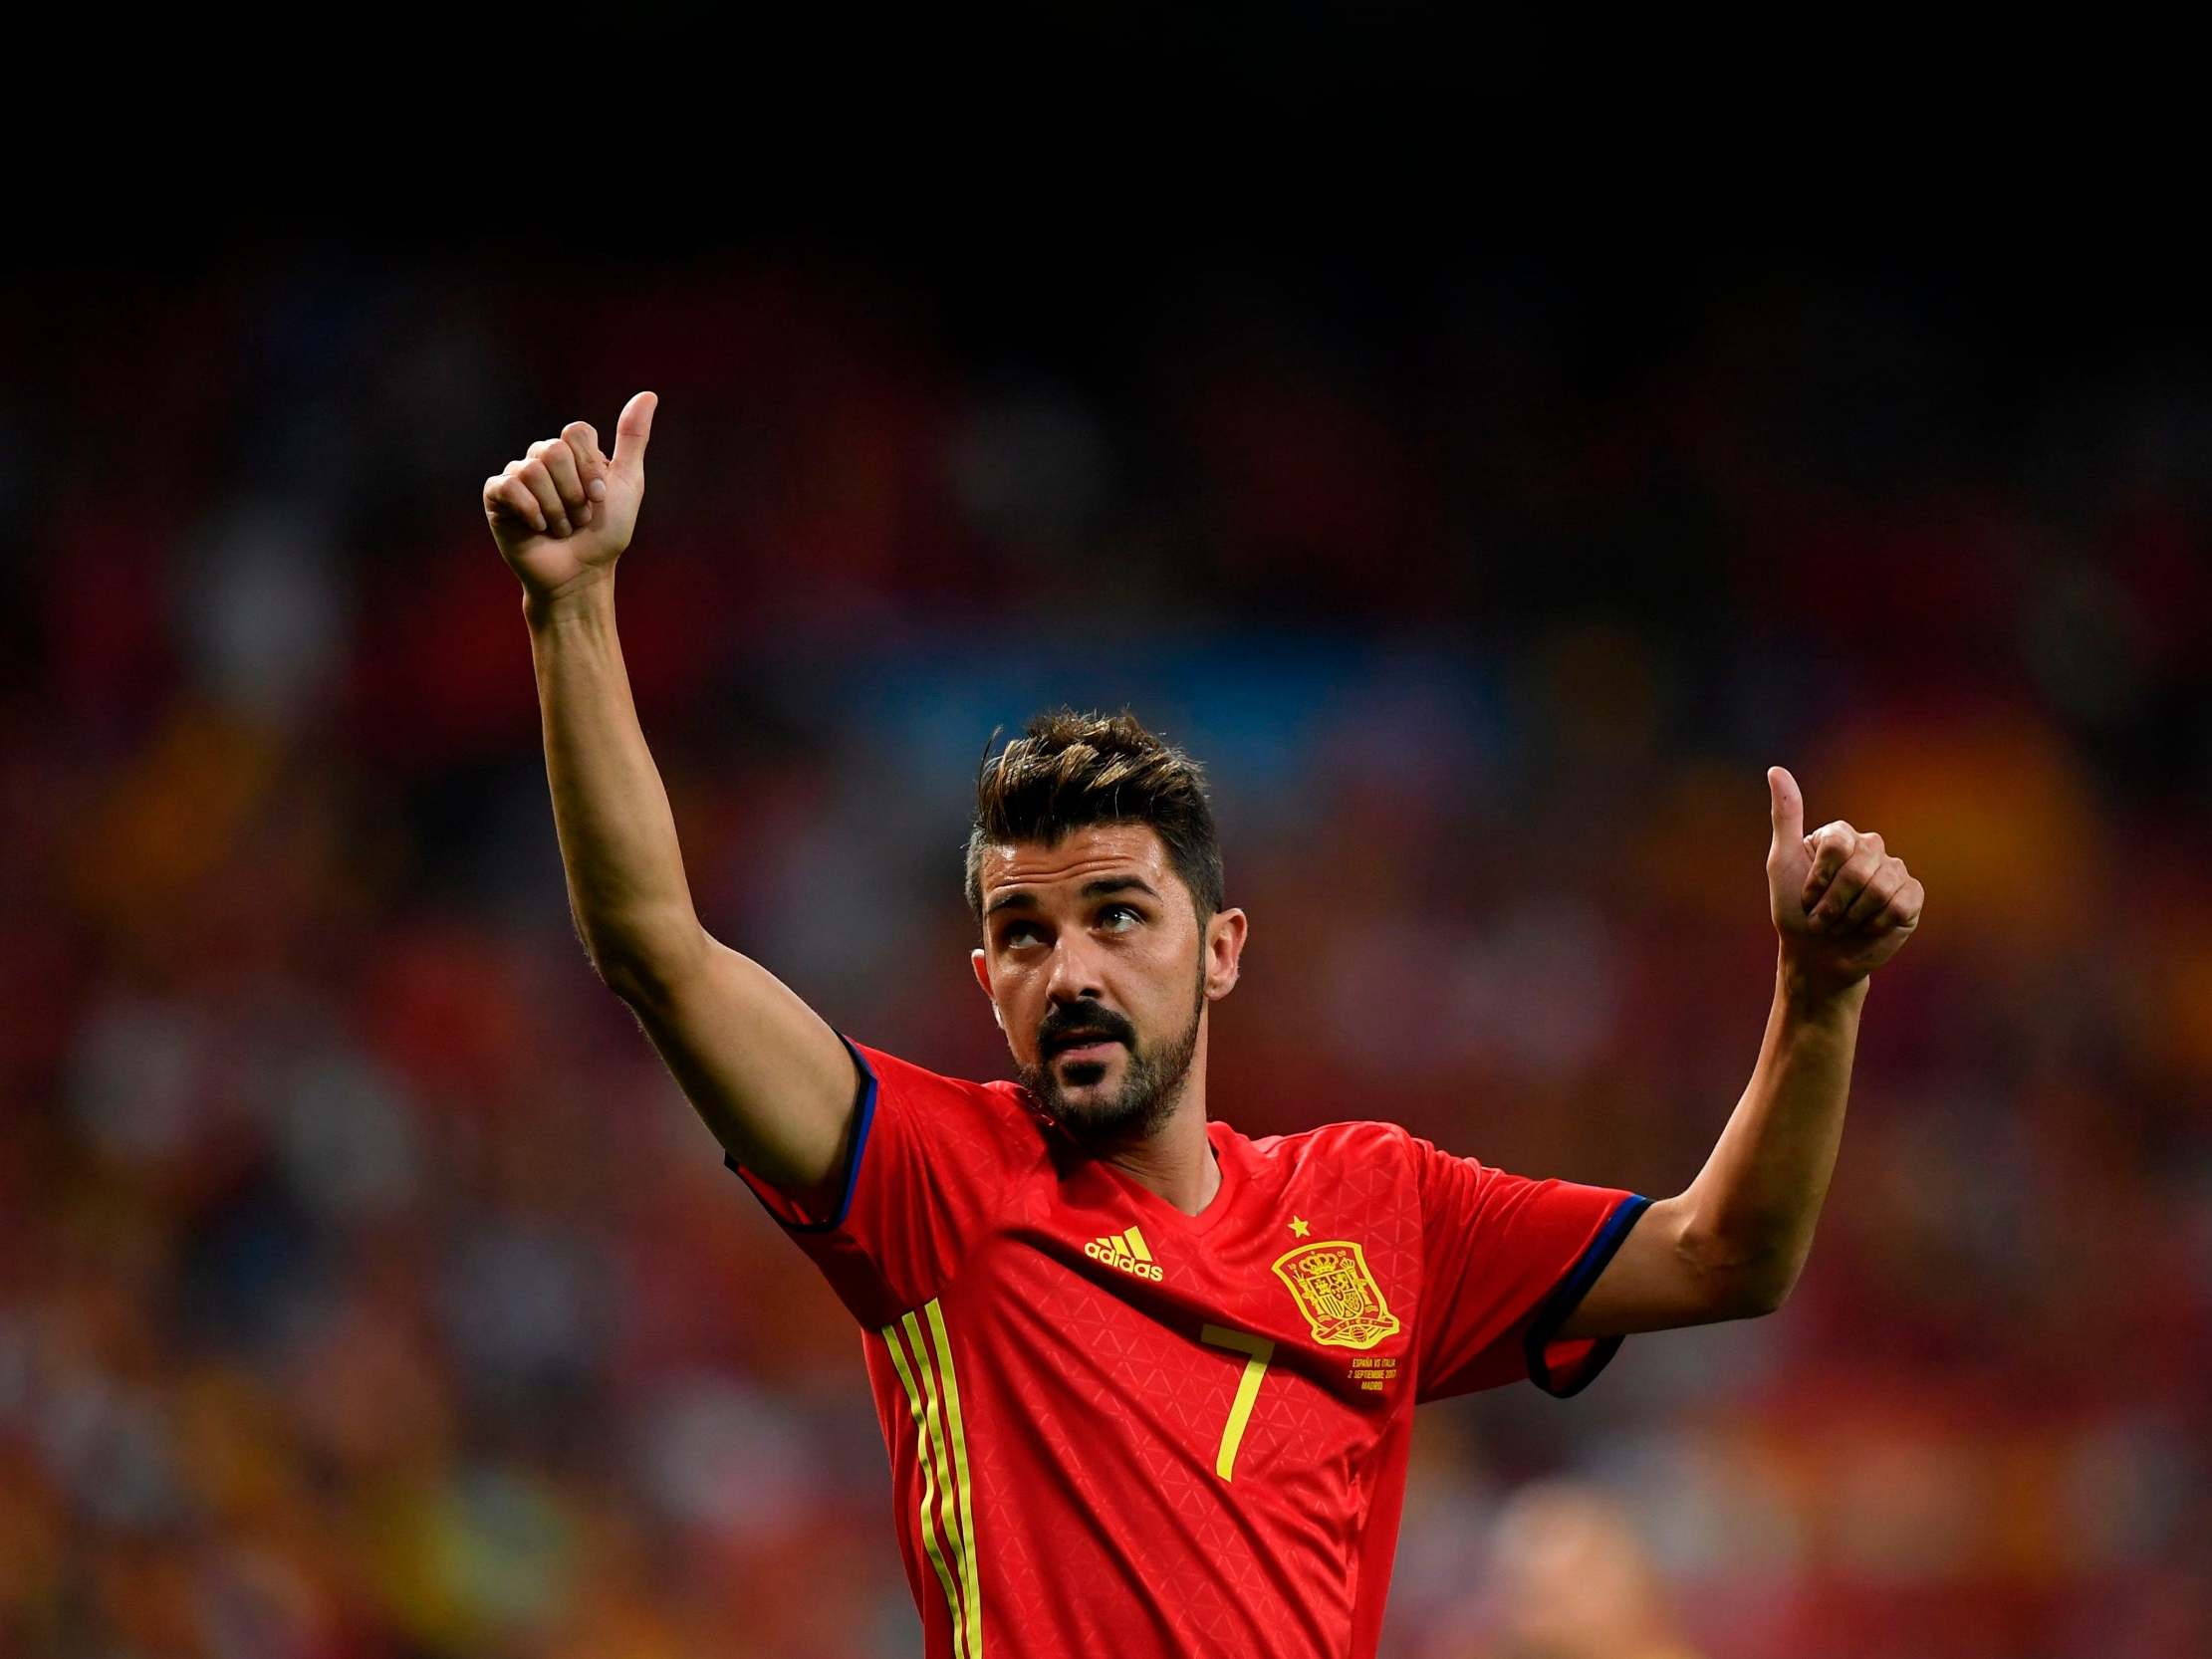 David Villa will retire as one of the great goalscorers